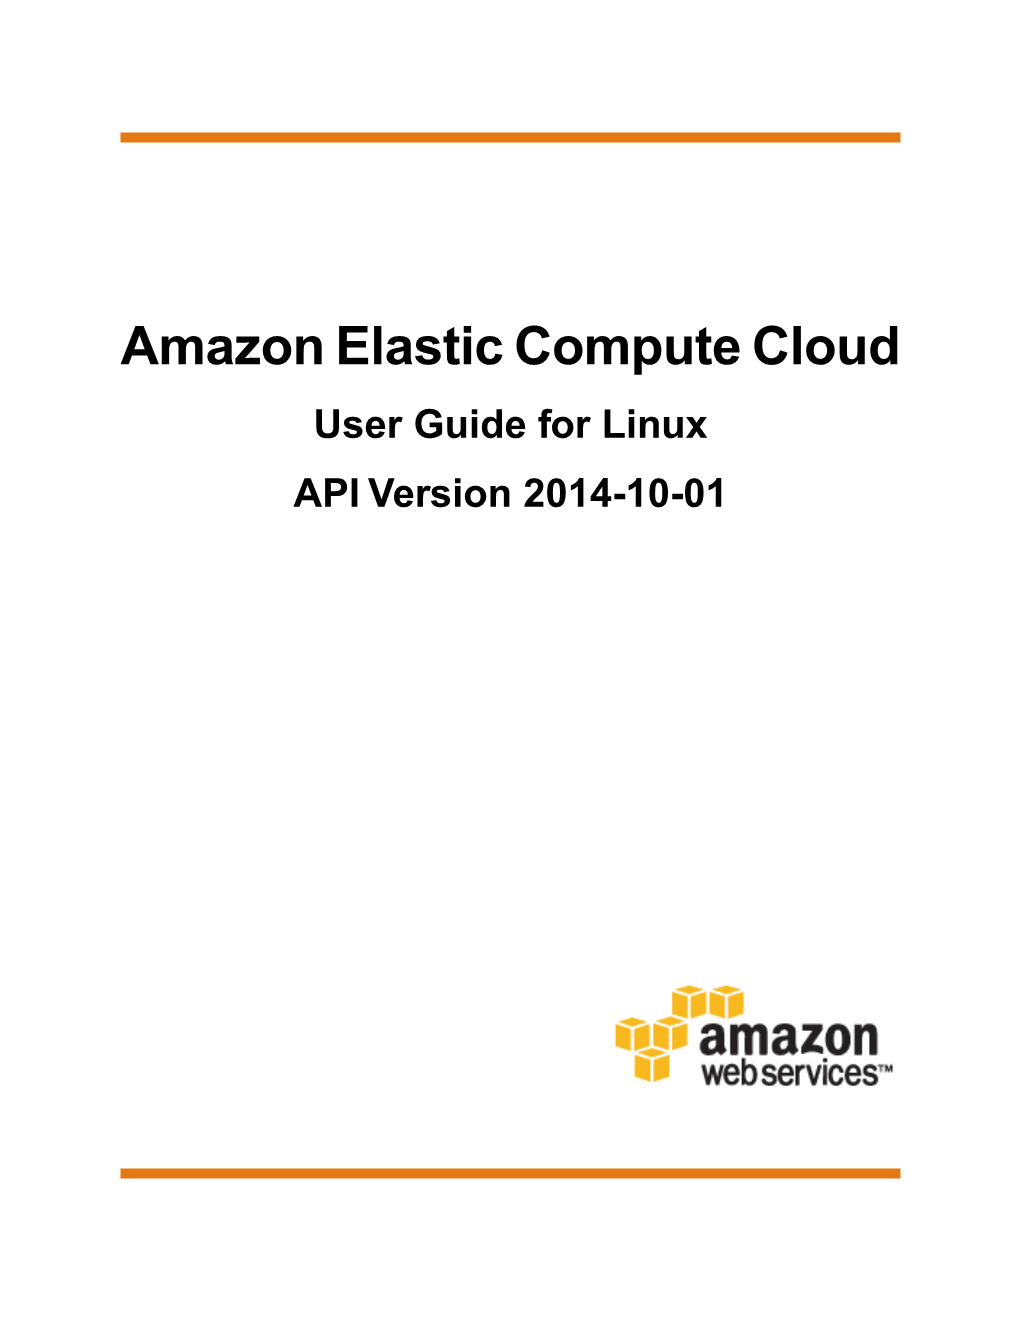 Amazon Elastic Compute Cloud User Guide for Linux API Version 2014-10-01 Amazon Elastic Compute Cloud User Guide for Linux